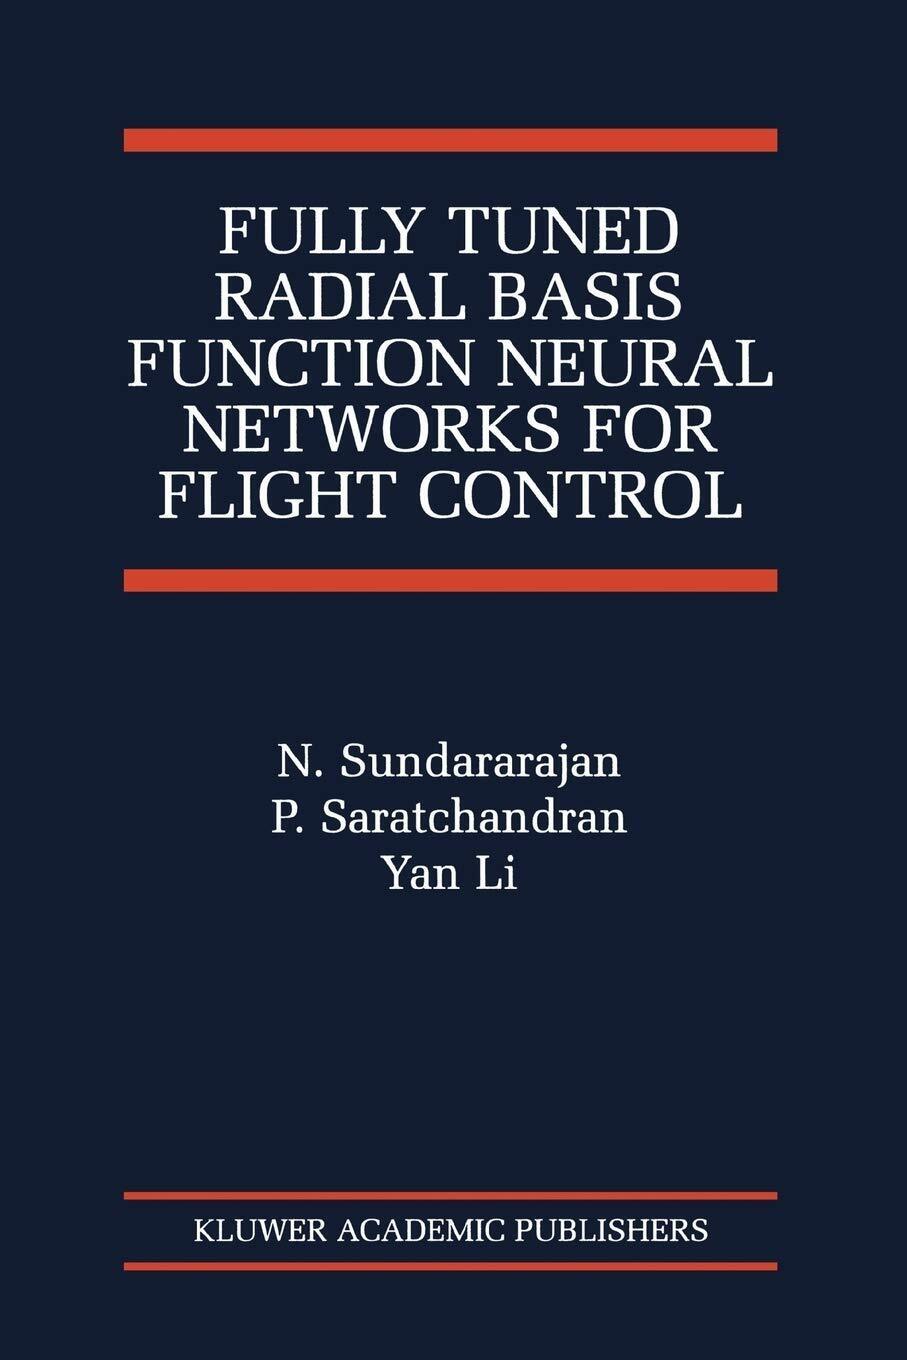 Fully Tuned Radial Basis Function Neural Networks for Flight Control - 2010 libro usato